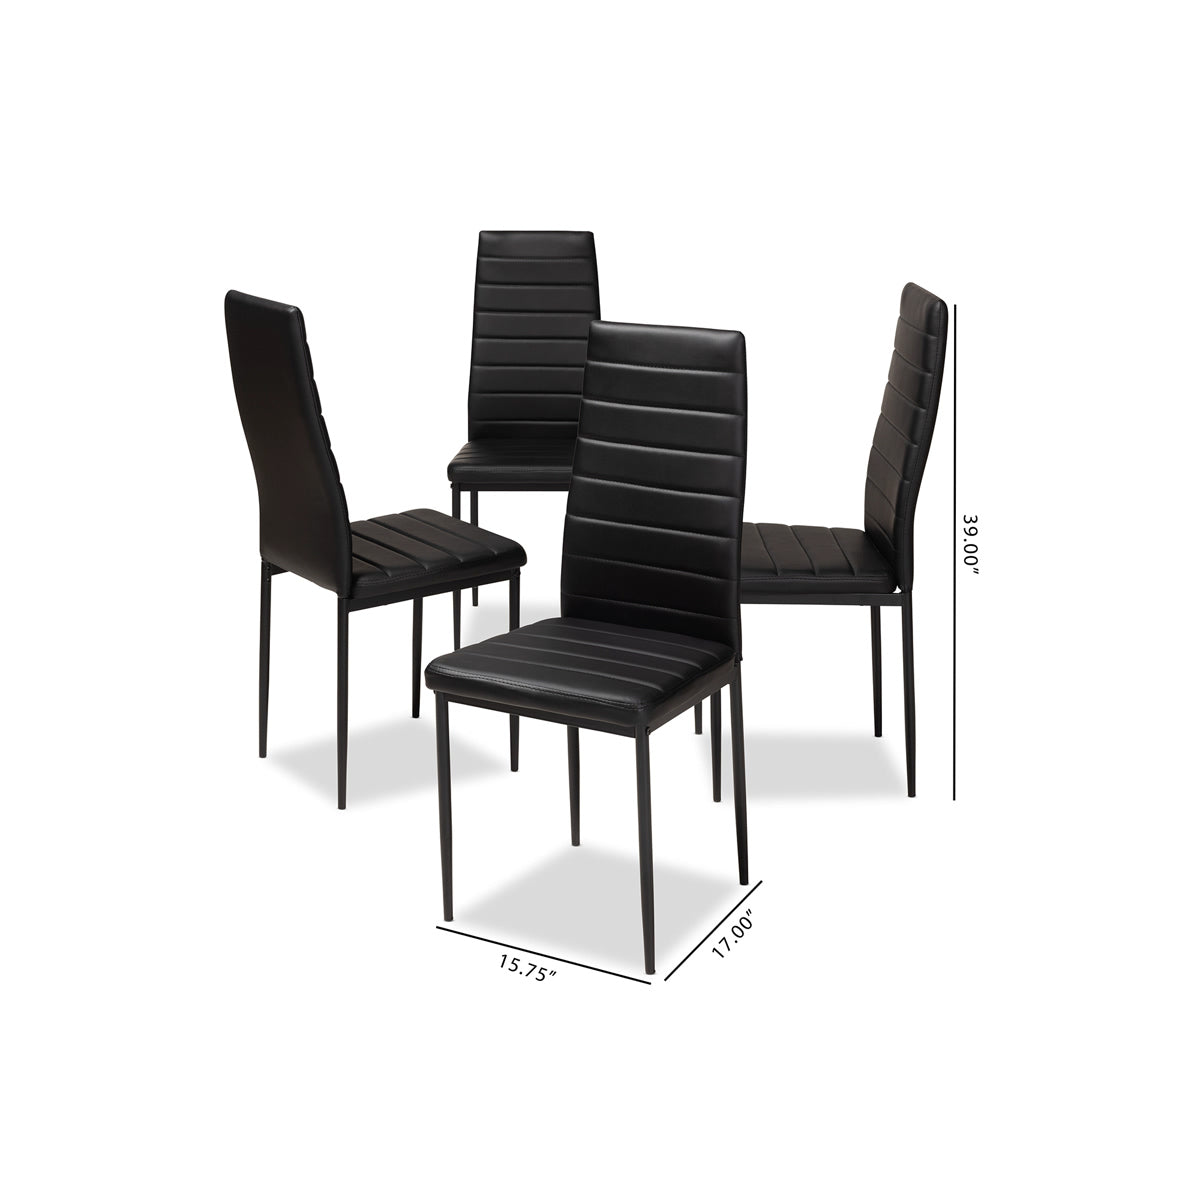 Baxton Studio Armand Modern and Contemporary Black Faux Leather Upholstered Dining Chair (Set of 4) Baxton Studio-dining chair-Minimal And Modern - 5